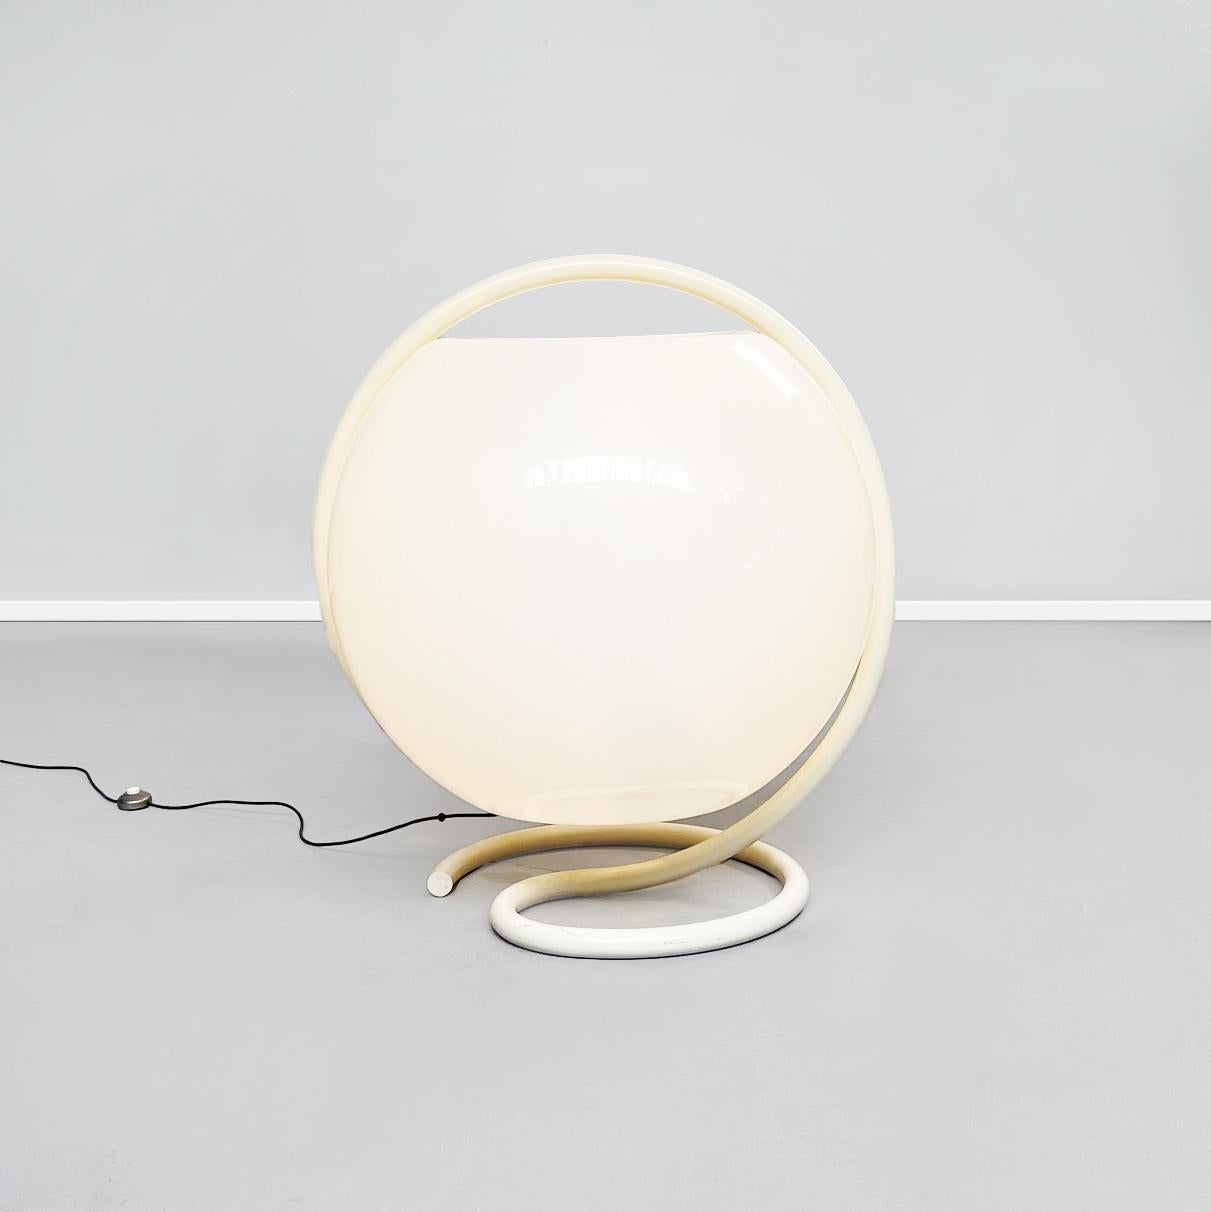 Italian floor lamp Mappamondo mod 2144 by Martinelli per Martinelli Luce, 1960s

Floor lamp Mappamondo model 2144 with spherical shape in plexiglass and tubular steel. The light is a sphere with two hollow sides in opaline plexiglass. The tubular